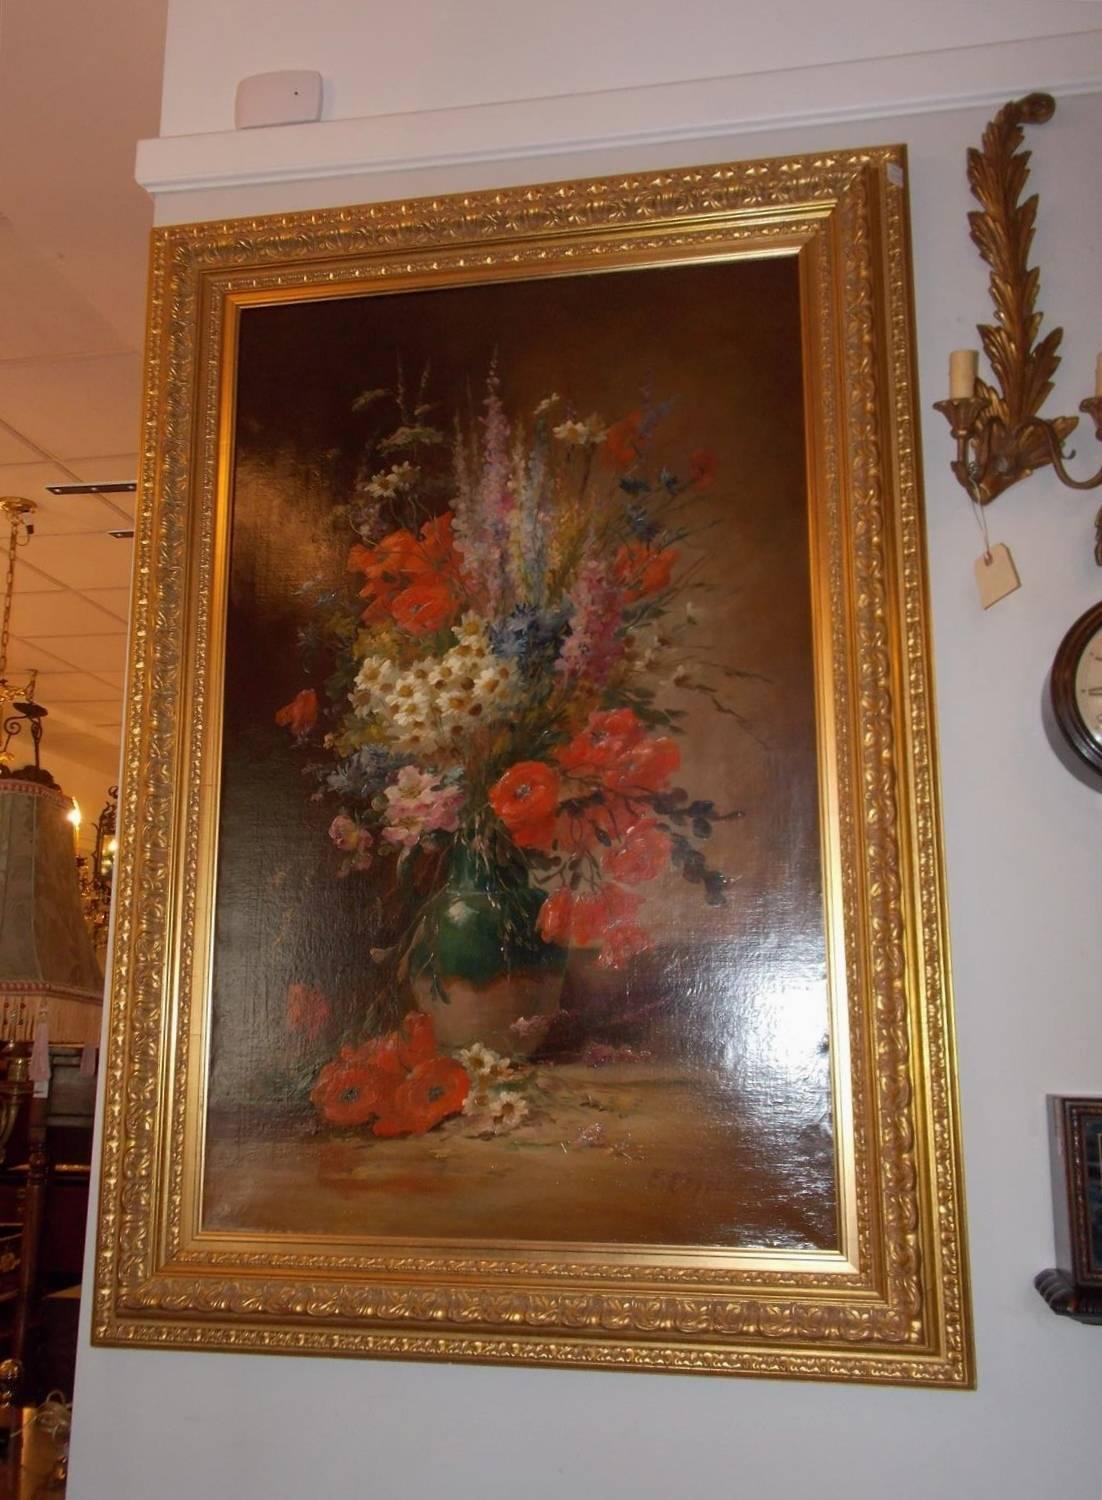 A very fine and rare oil on canvas still life of Summer flowers in the original gilt carved floral frame. Signed lower right corner Edmund Van Coppenolle, Belgium, 1846-1914.